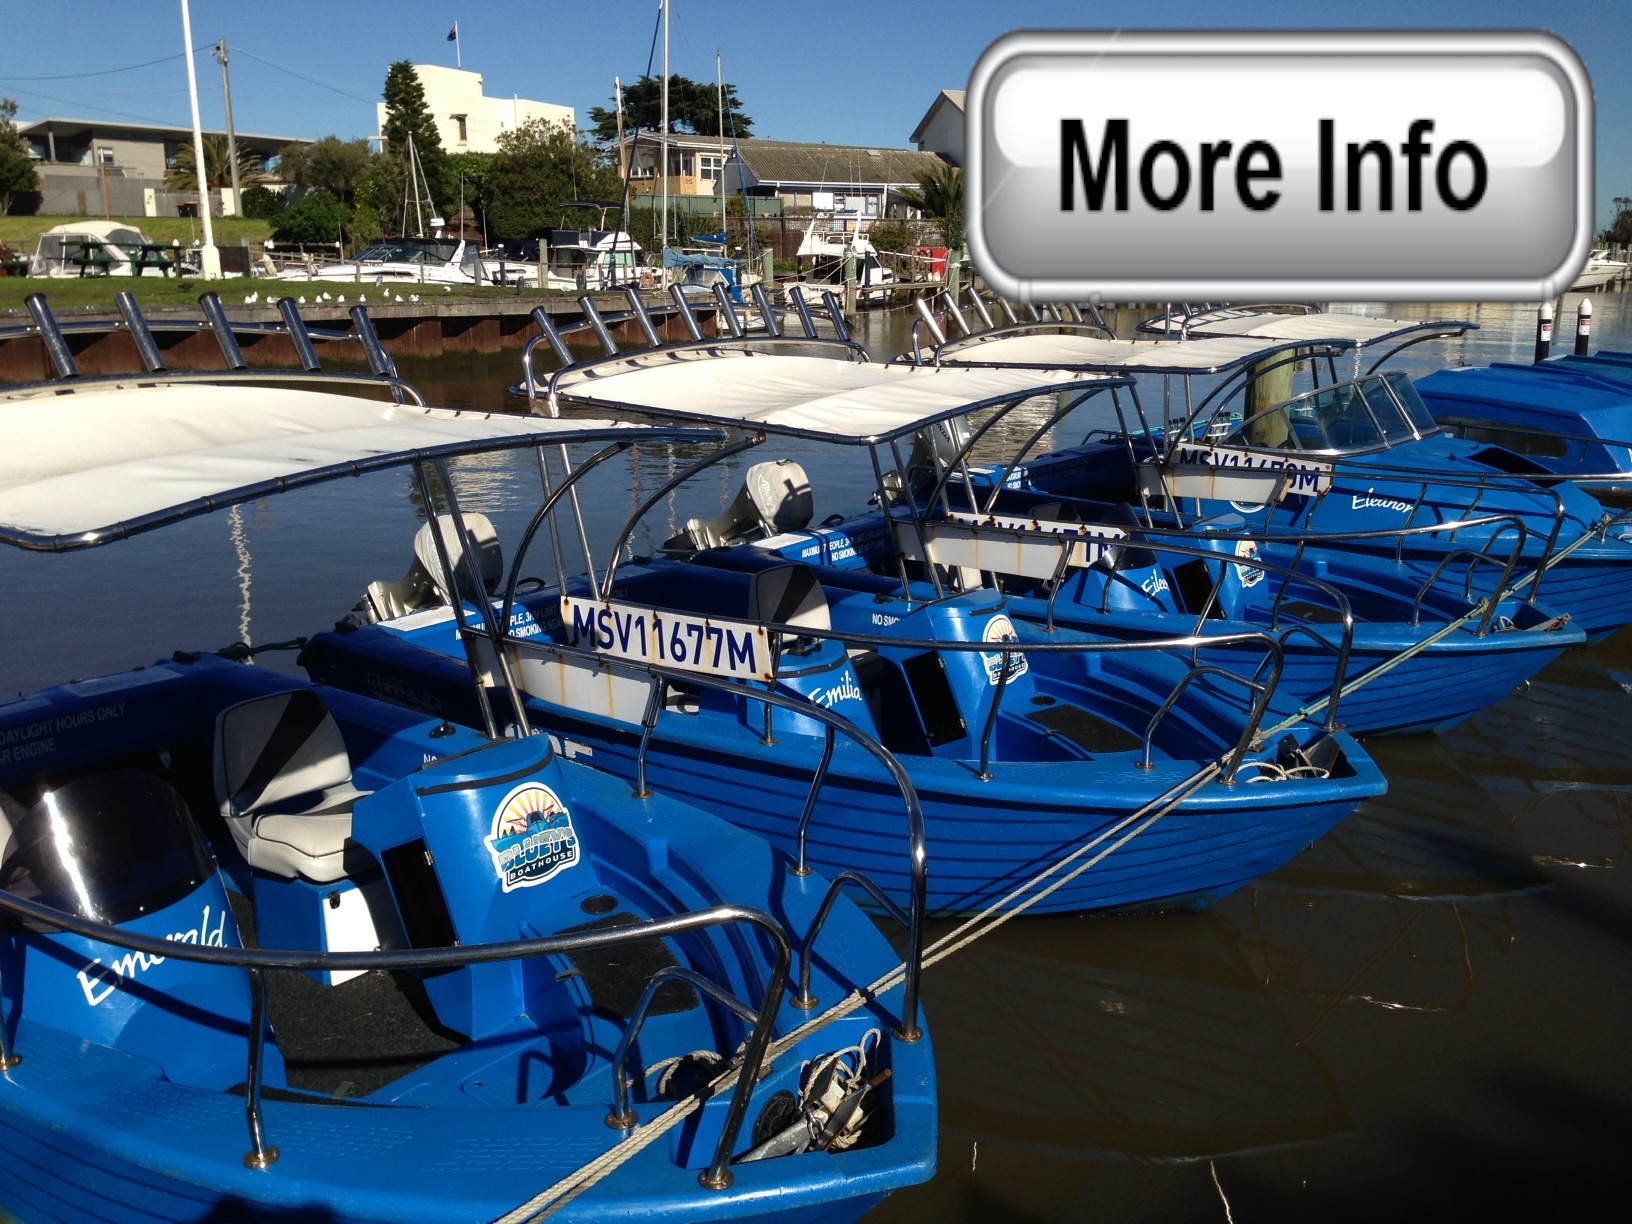 "SUPERFISH" 4 Hour Hire - Extreme Boat, **Faster, Quieter, Best Fishing Success**